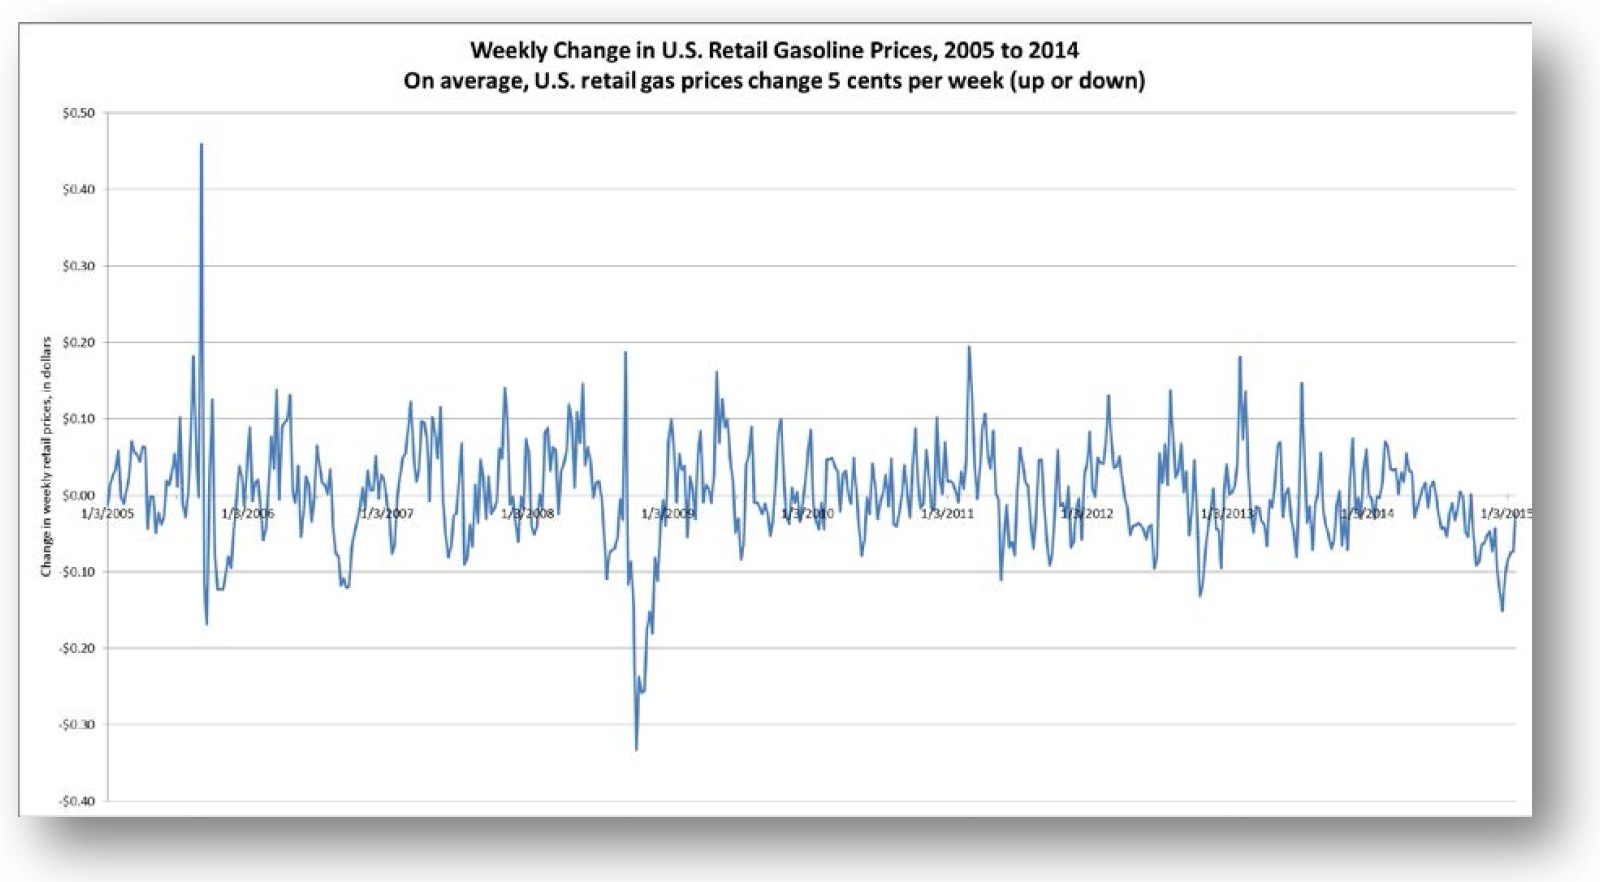 Weekly Change in U.S. Gasoline Prices, 2005 to 2014